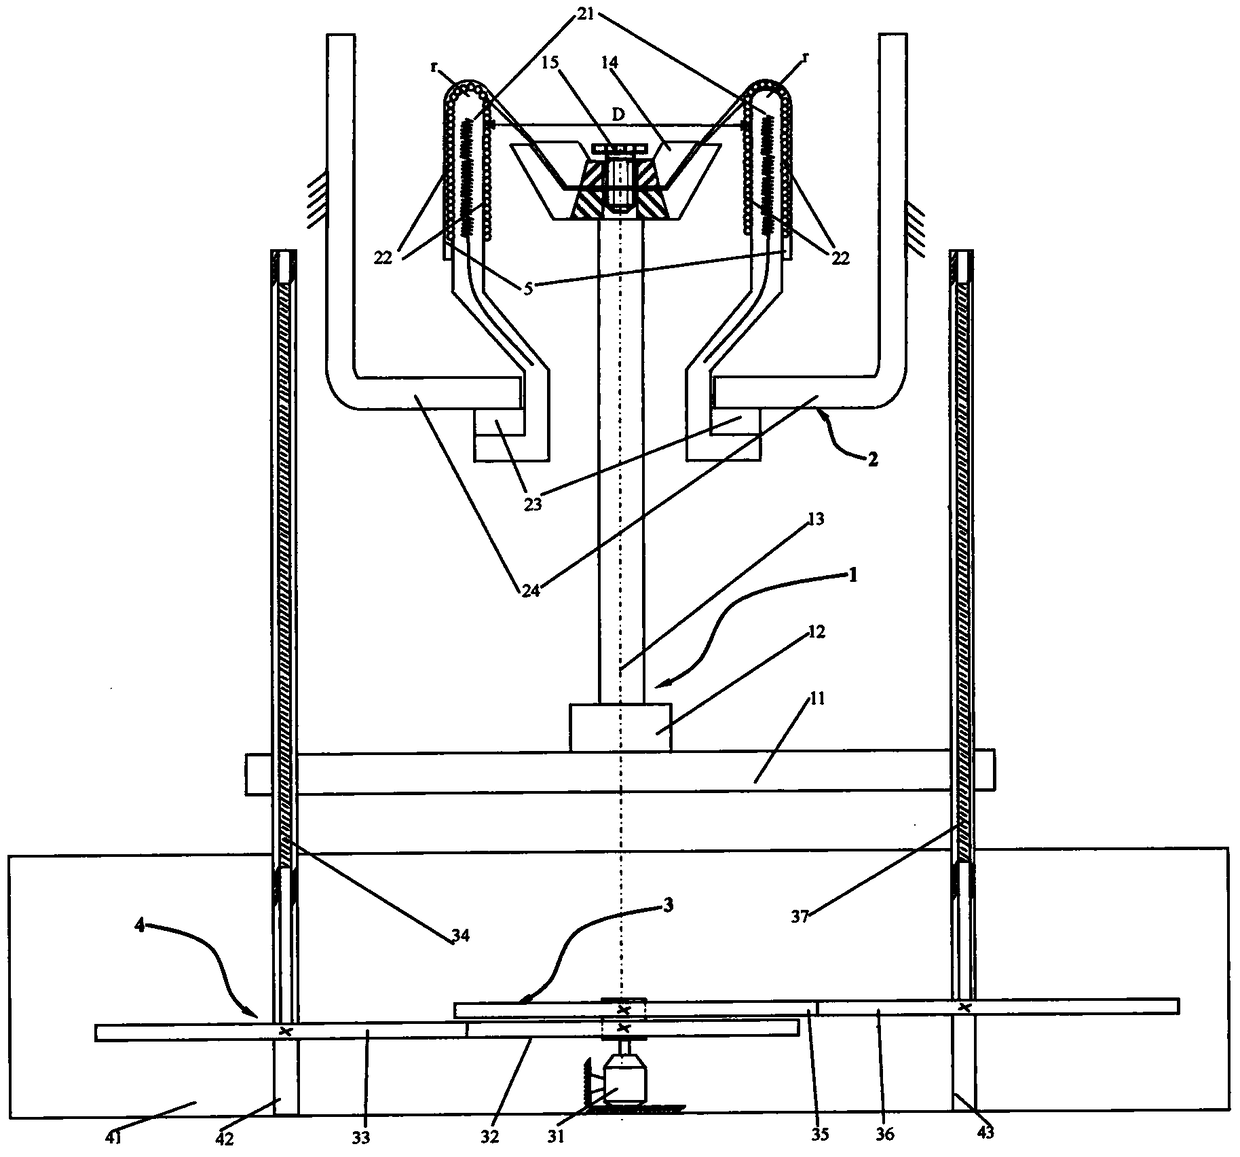 A pull-down tubular fabric drawing smoothness measuring device and method